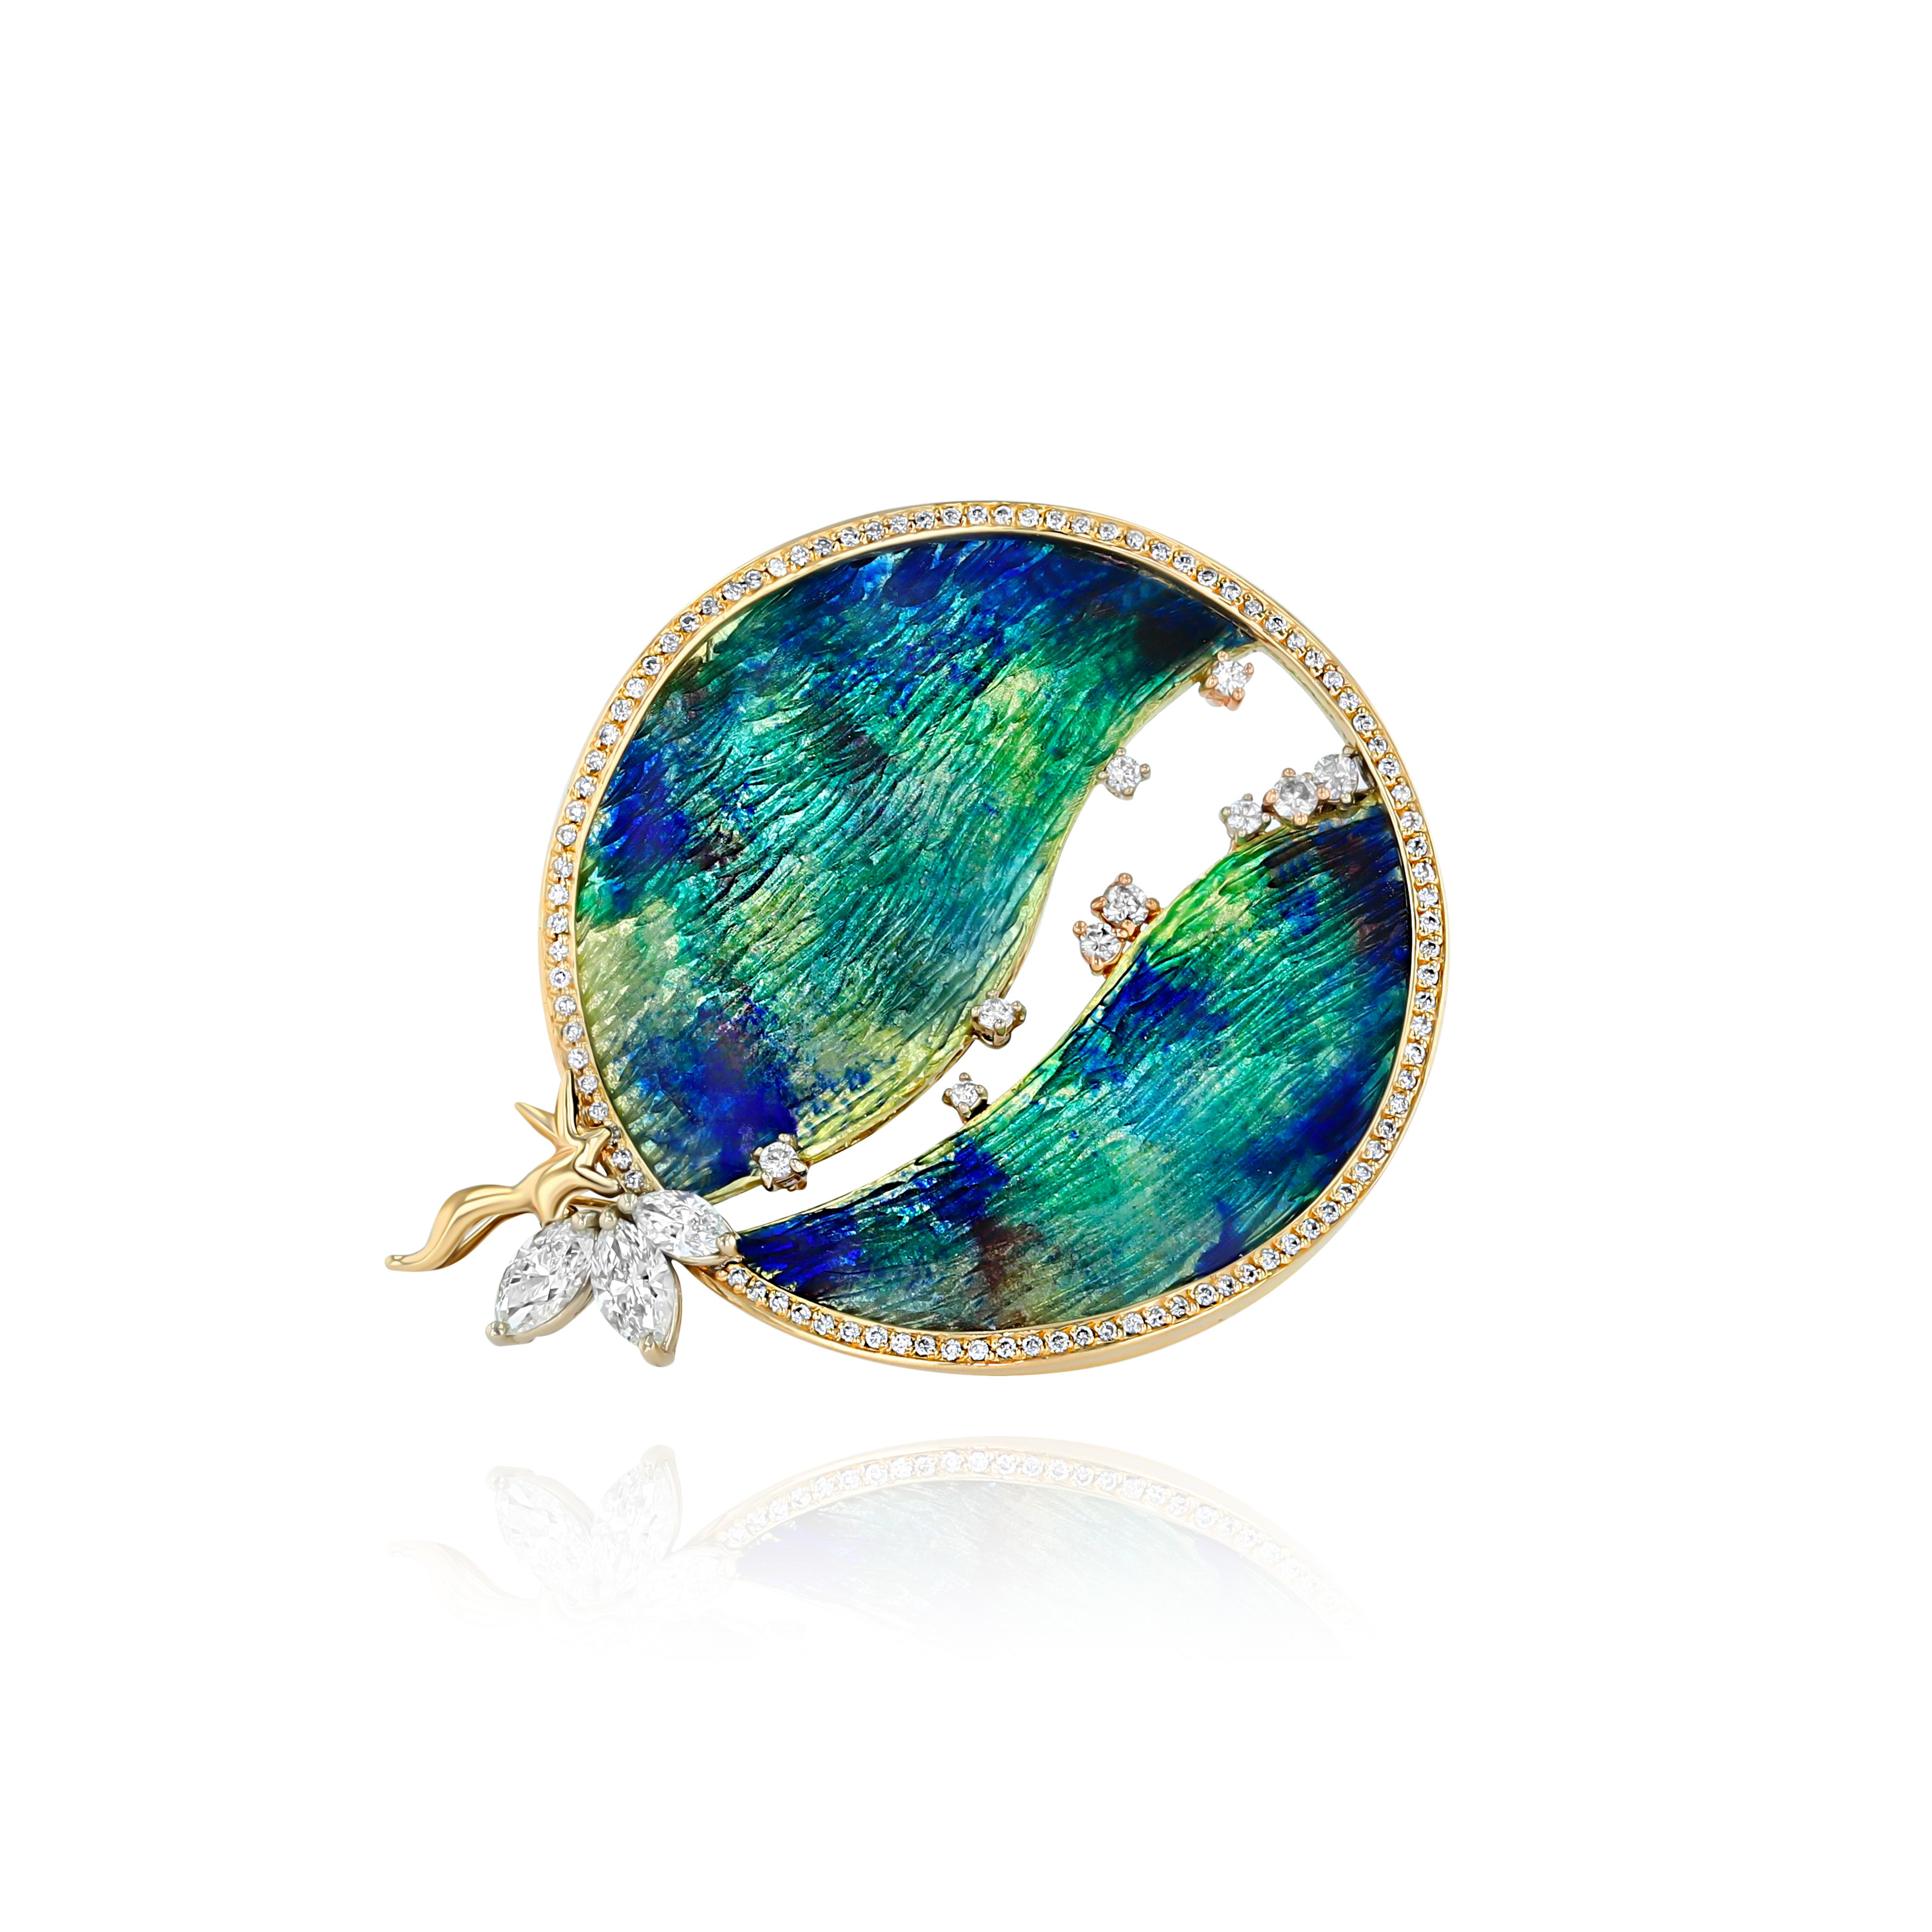 Round Yellow Gold Brooch with Green and Blue Cloisonne, a small fox, and round Diamonds, Medium